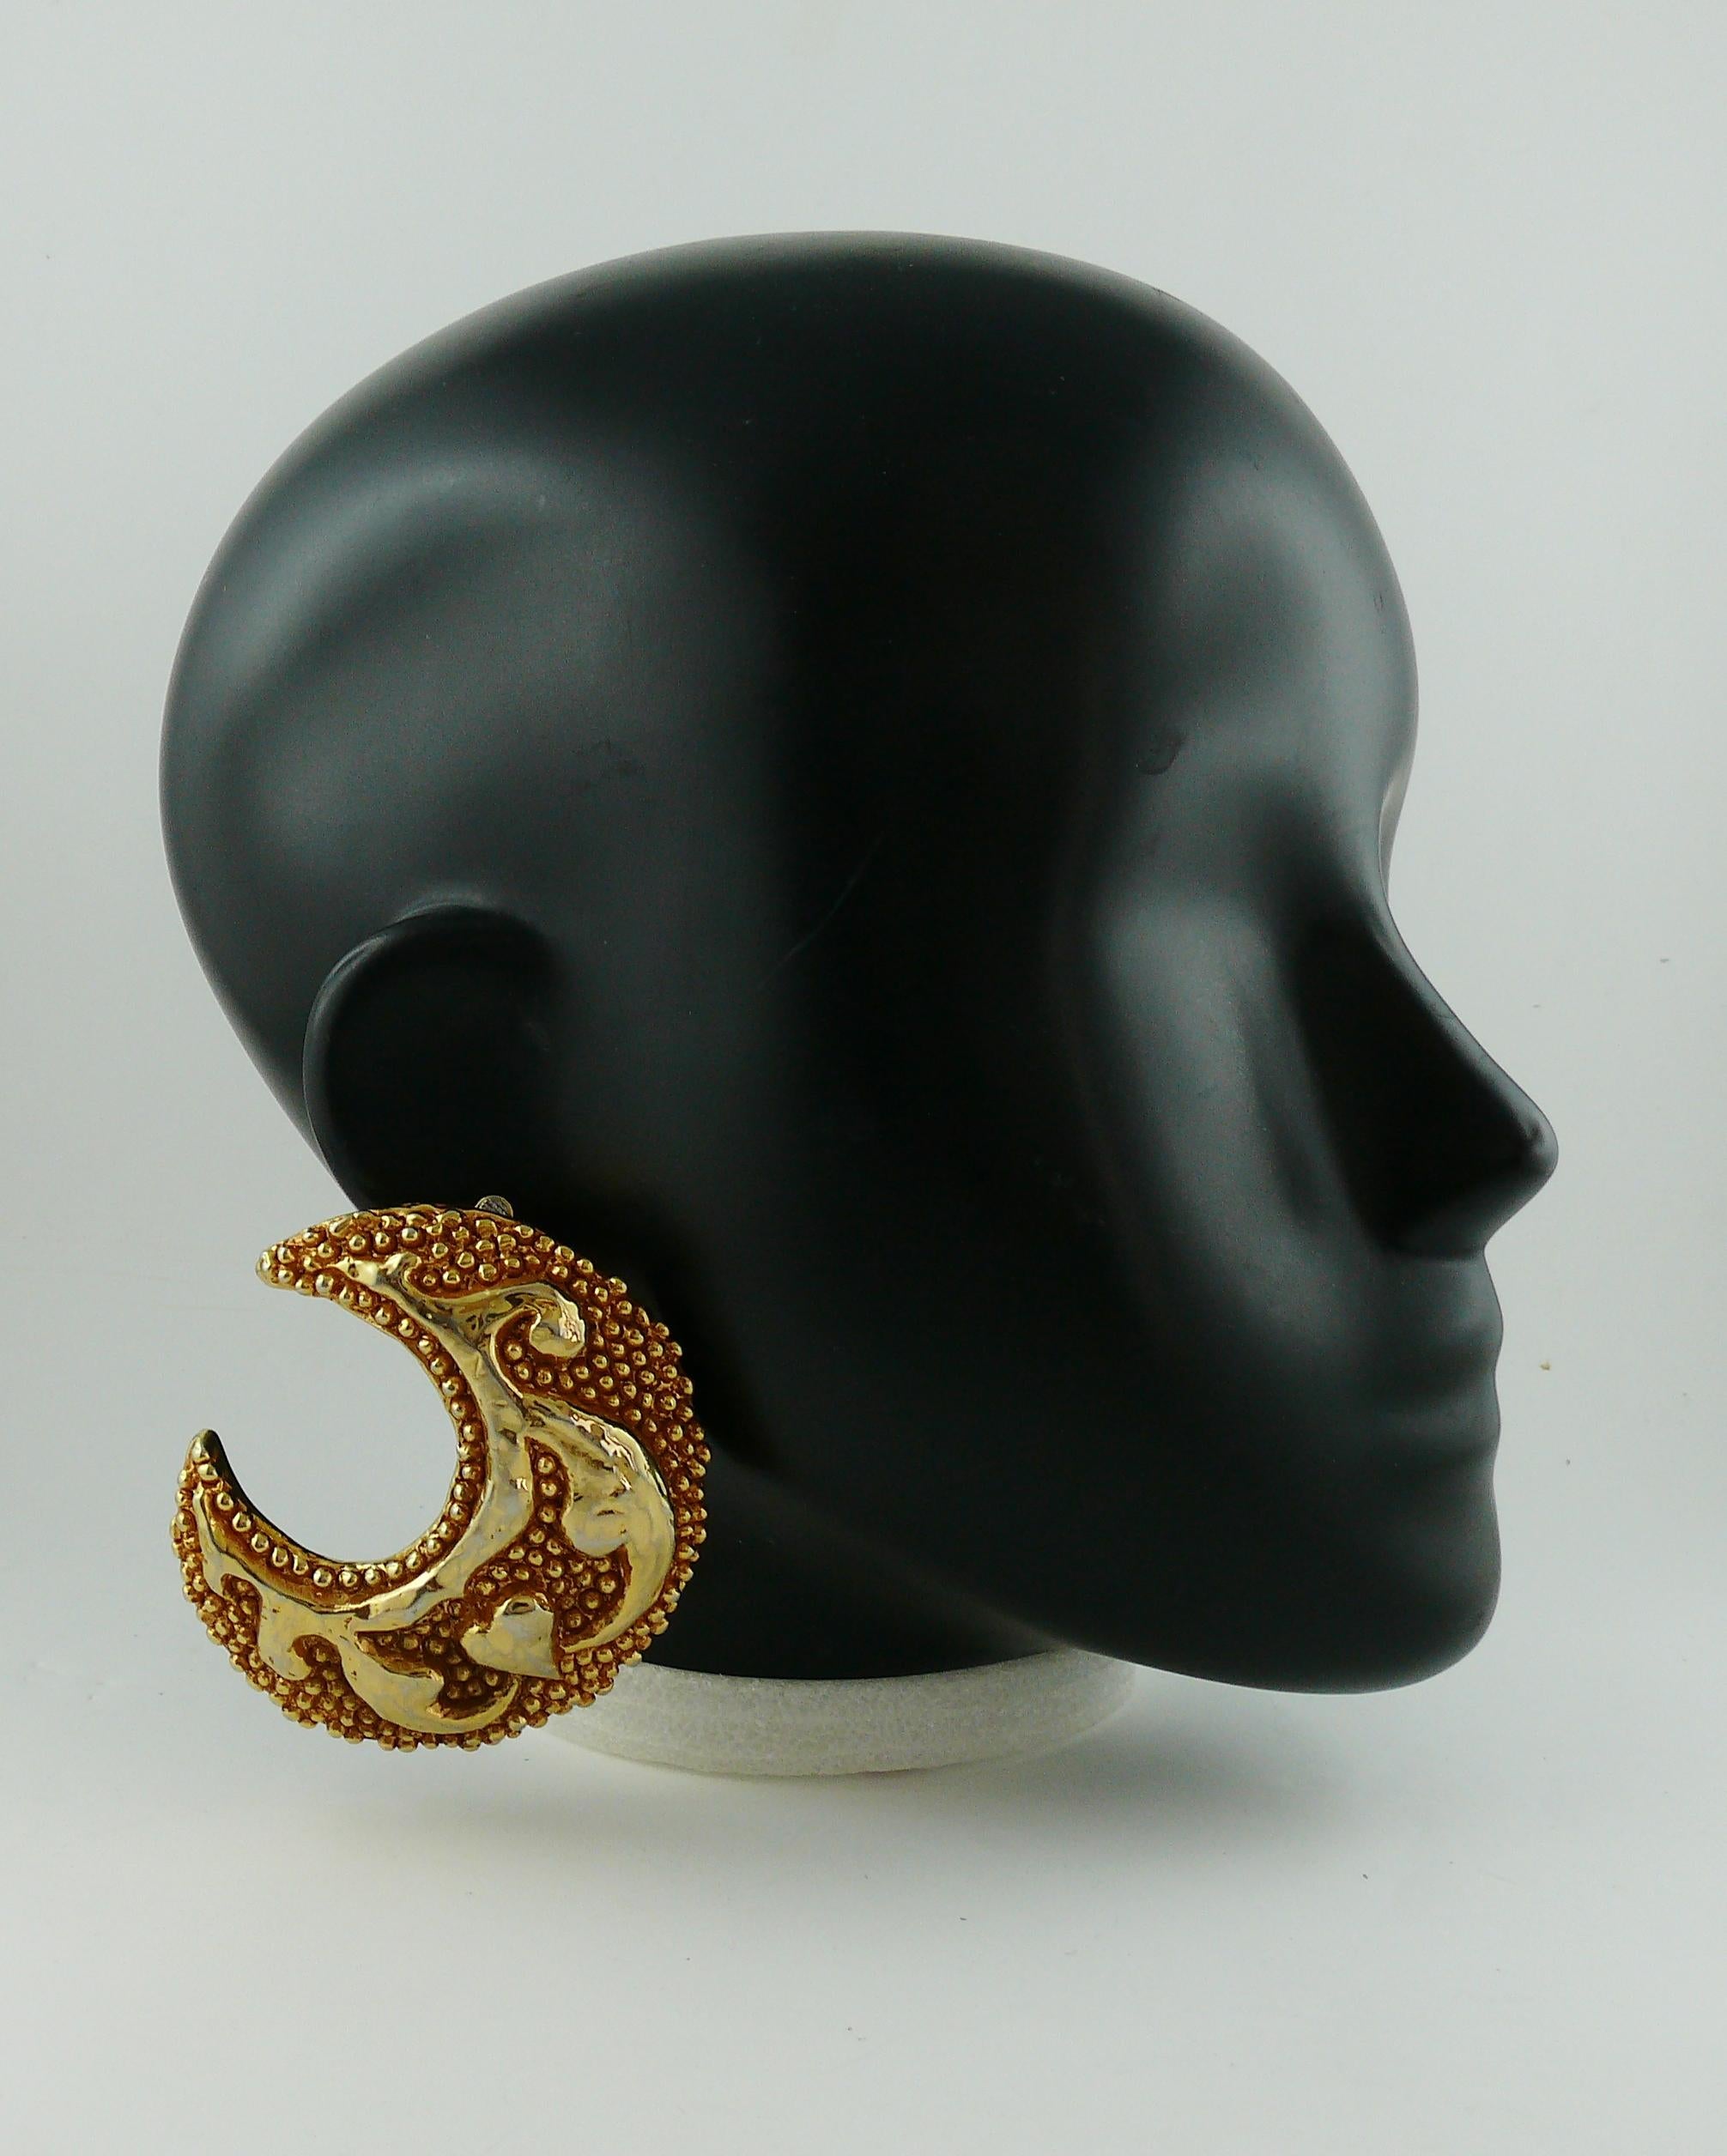 CHRISTIAN LACROIX vintage massive pair of crescent moon shaped vintage clip-on earrings featuring stylized arabesques and heart on a pearl background design.

Marked CHRISTIAN LACROIX CL Made in France.

Indicative measurements : height 7 cm (2.76